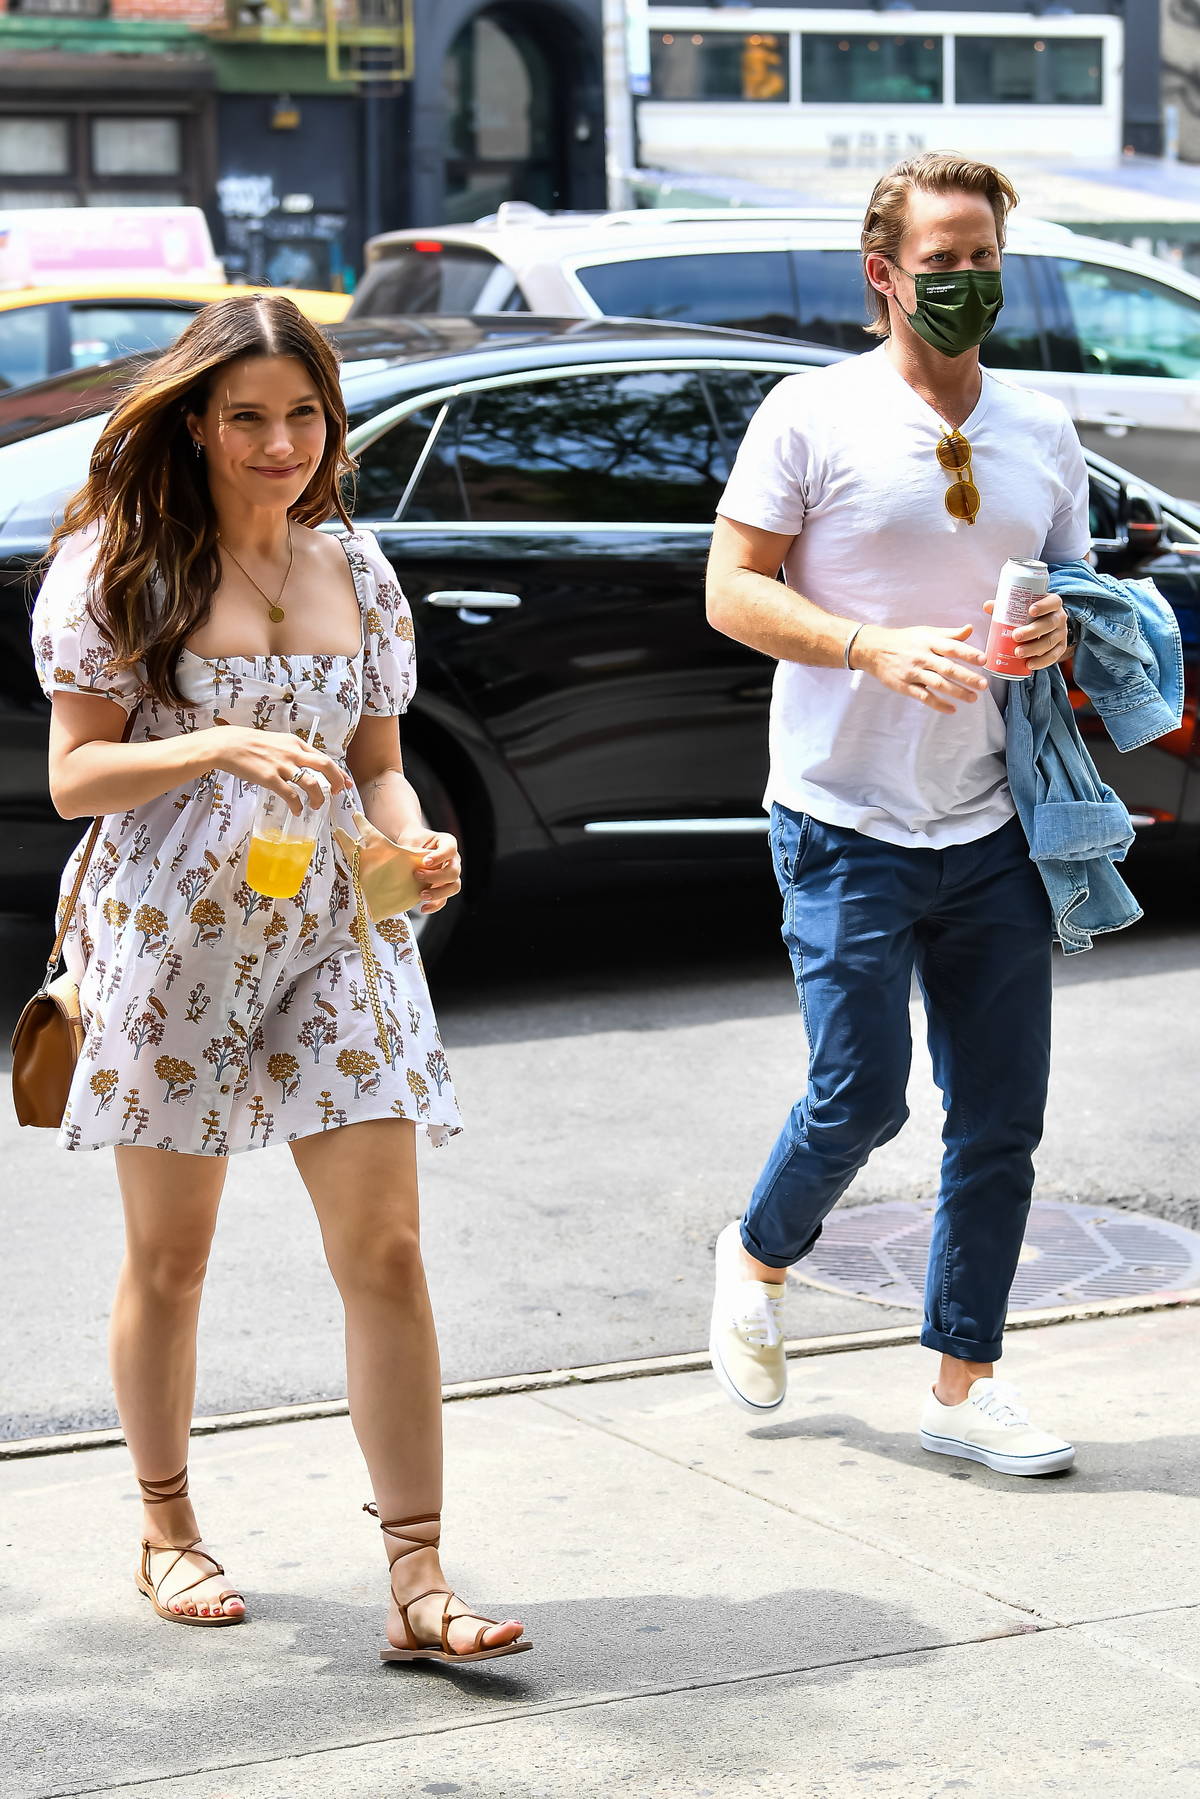 sophia bush shows her summer style in a floral print dress while heading  out for lunch with grant hughes in new york city-190621_10